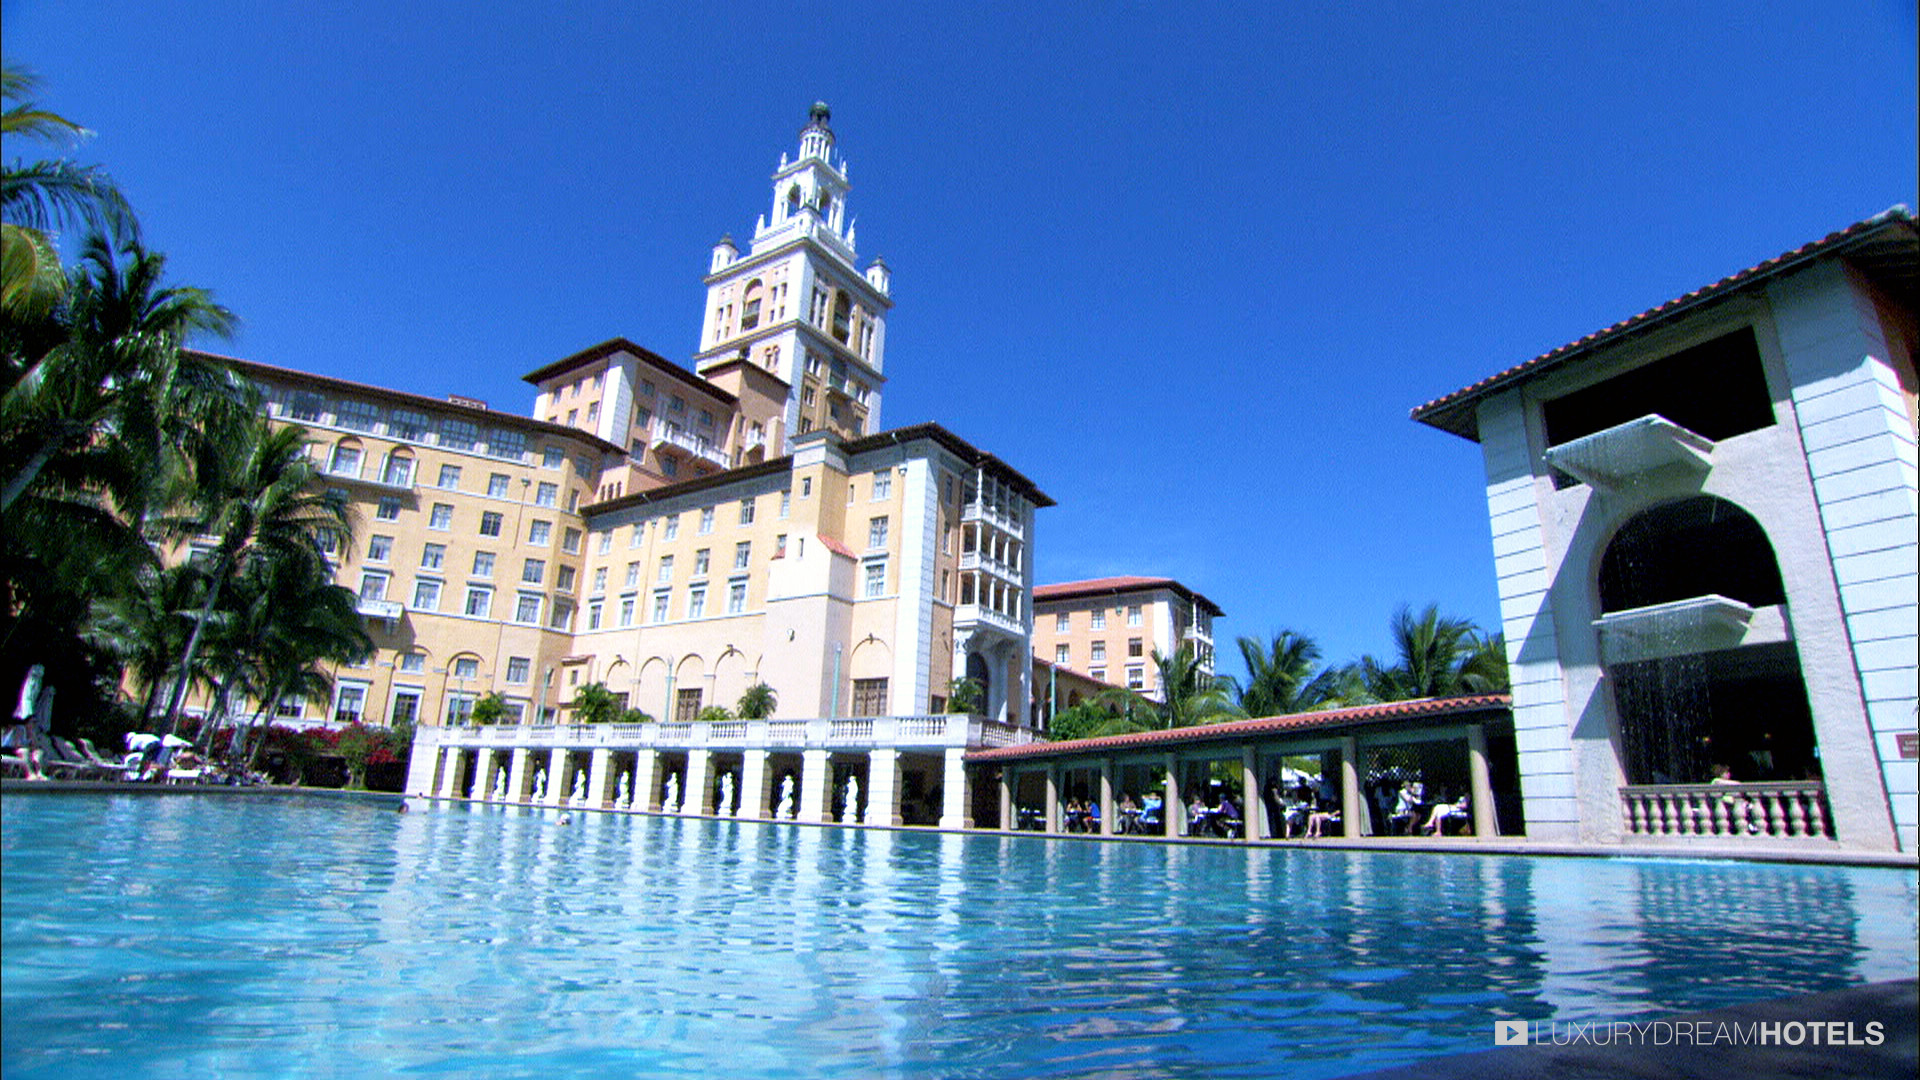 1920x1080 Luxury hotel, Biltmore Hotel, Coral Gables, United States - Luxury Dream  Hotels